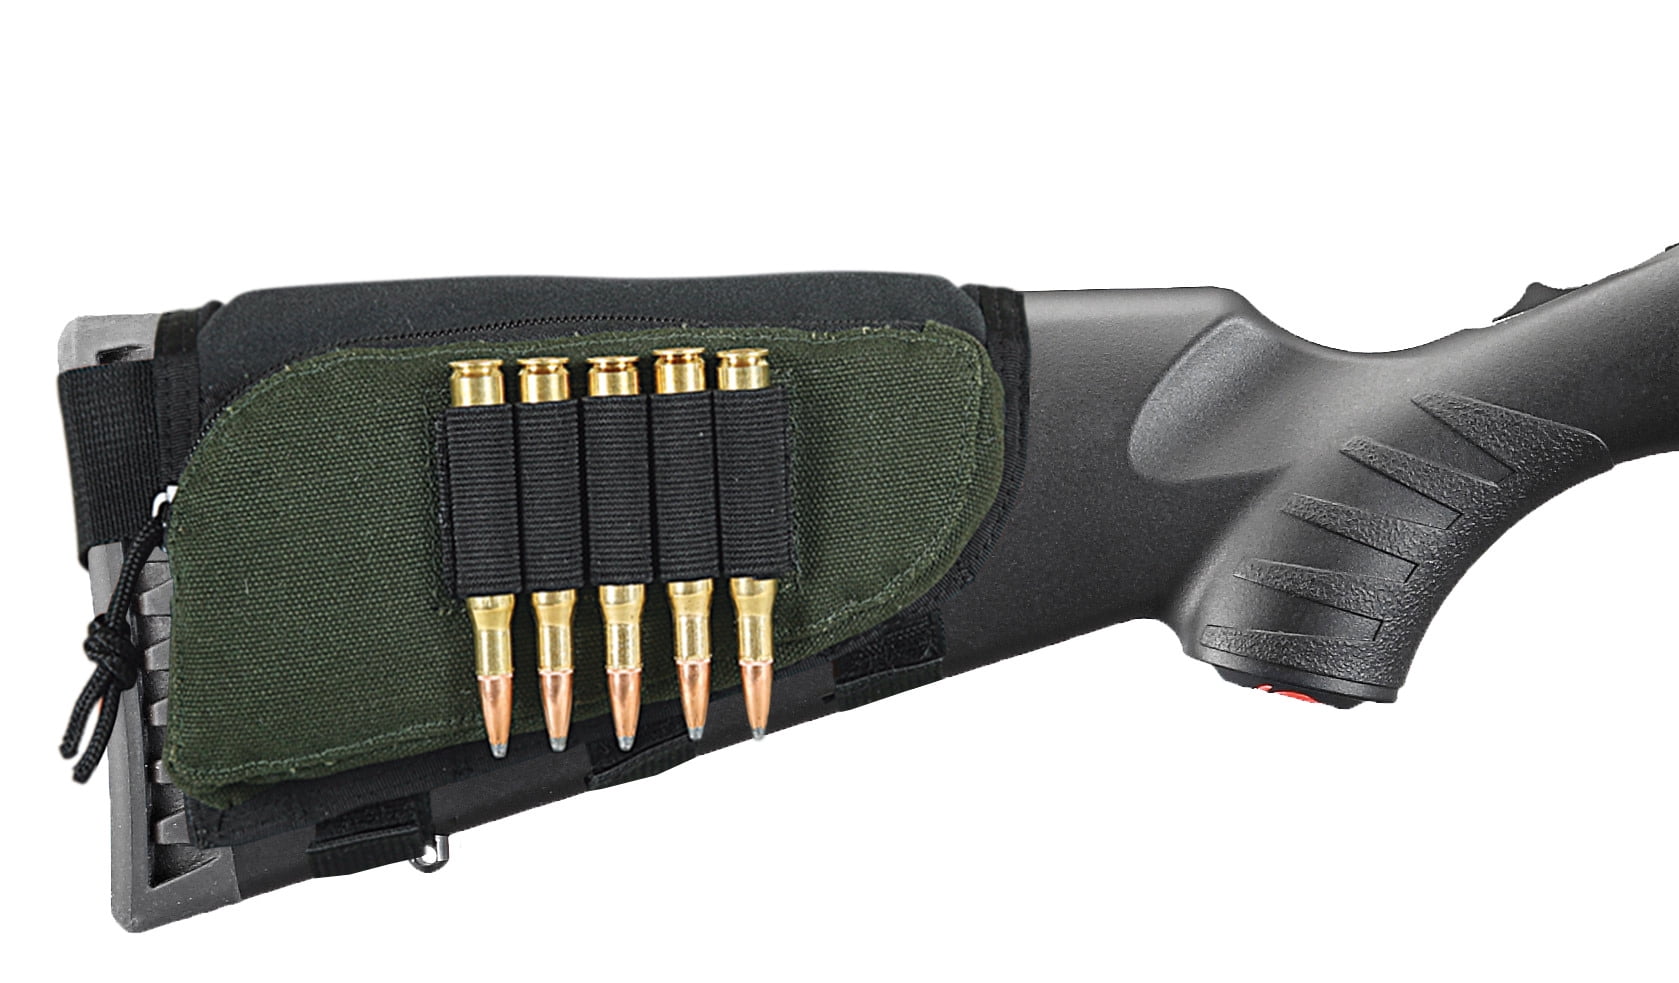 Adjustable Rifle Buttstock Cheek Rest Ammo Carrier Case for .308 or 300 winmag 